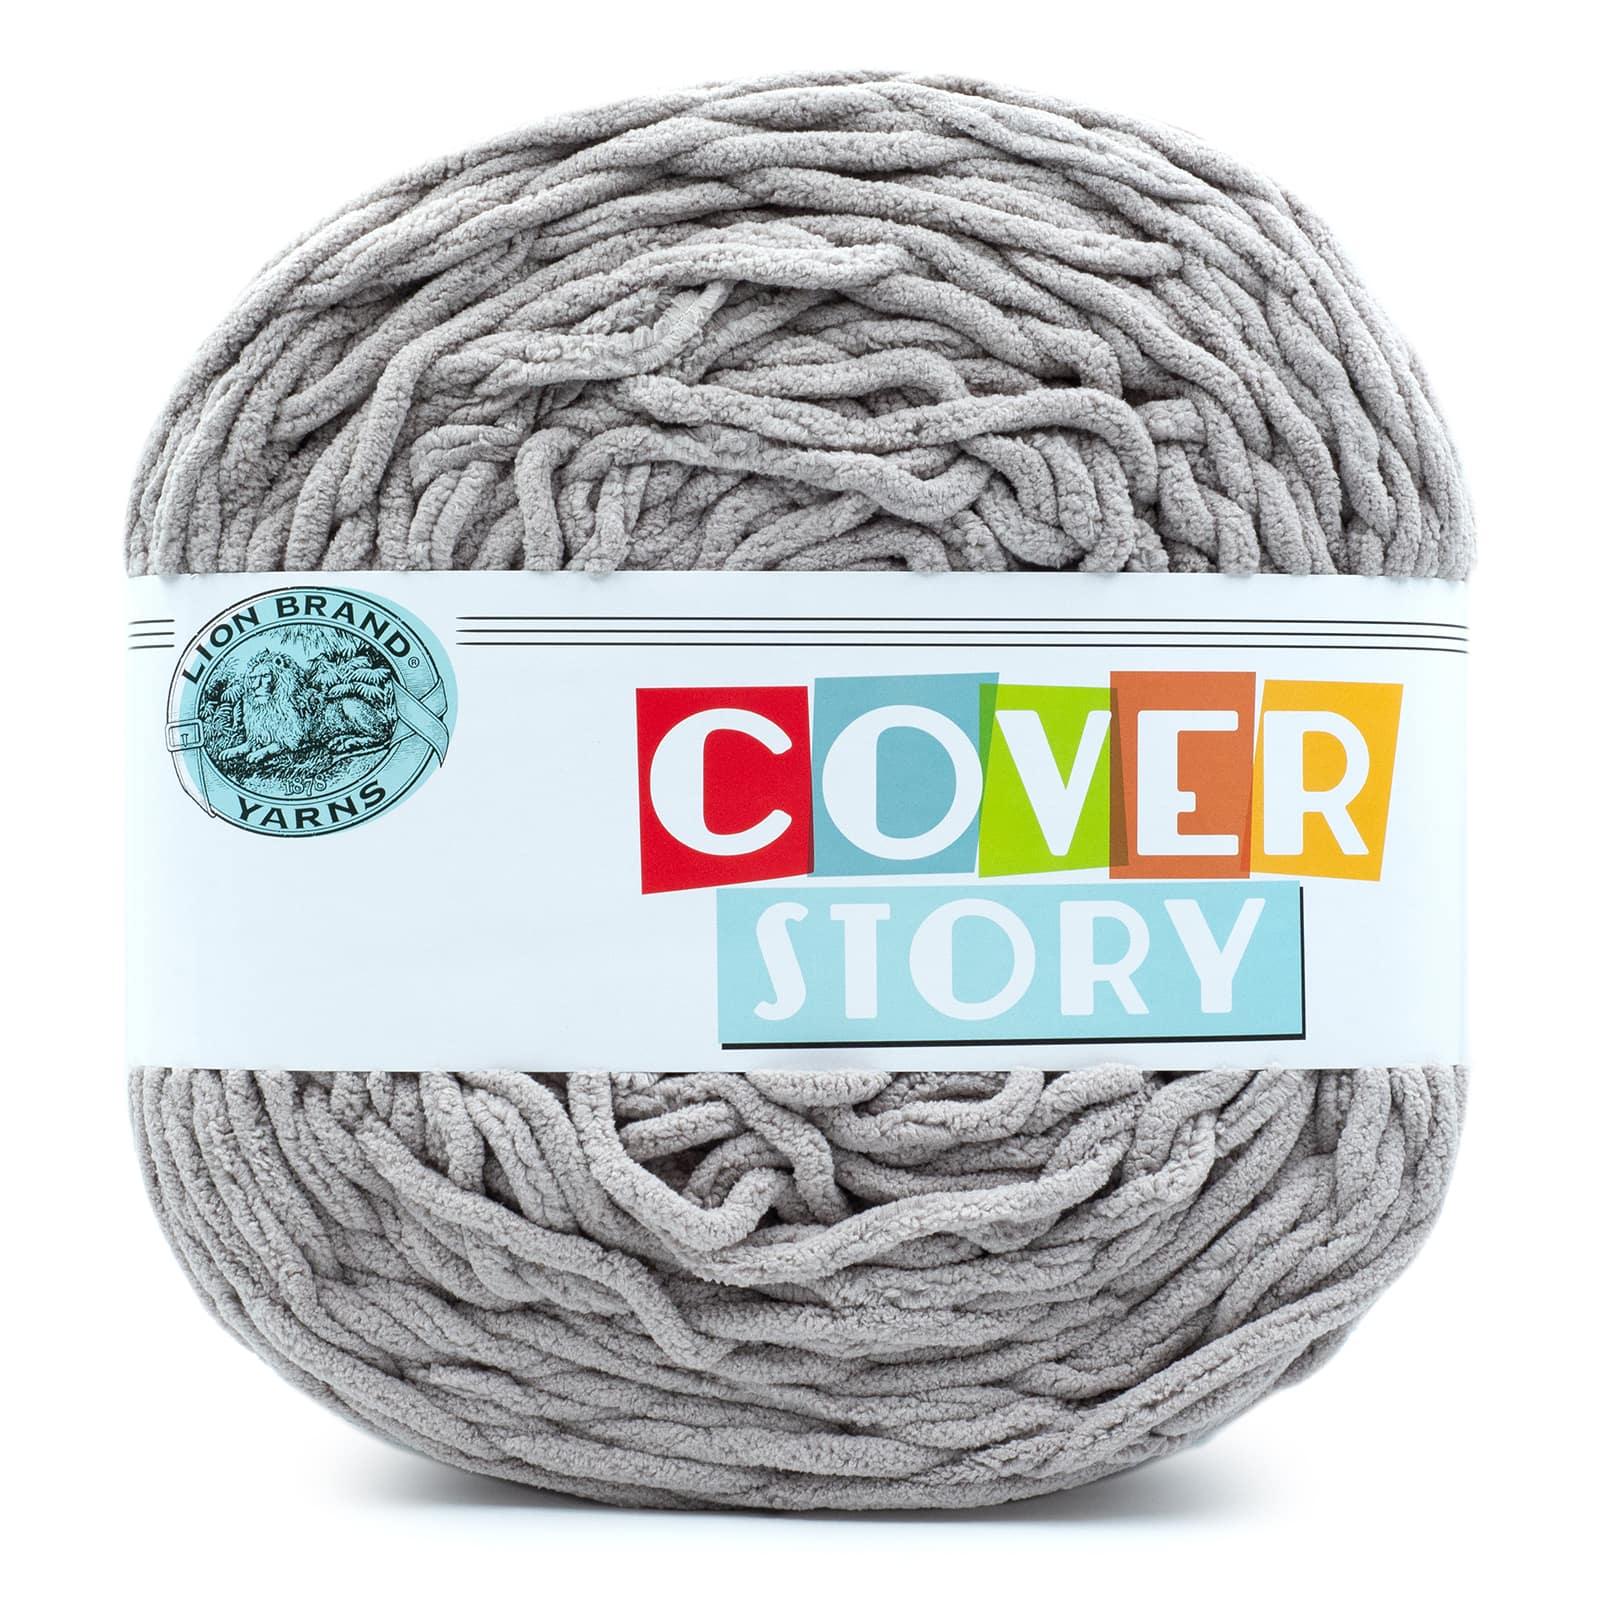 Lion BRAND Cover Story Yarn Cameo 023032063973 for sale